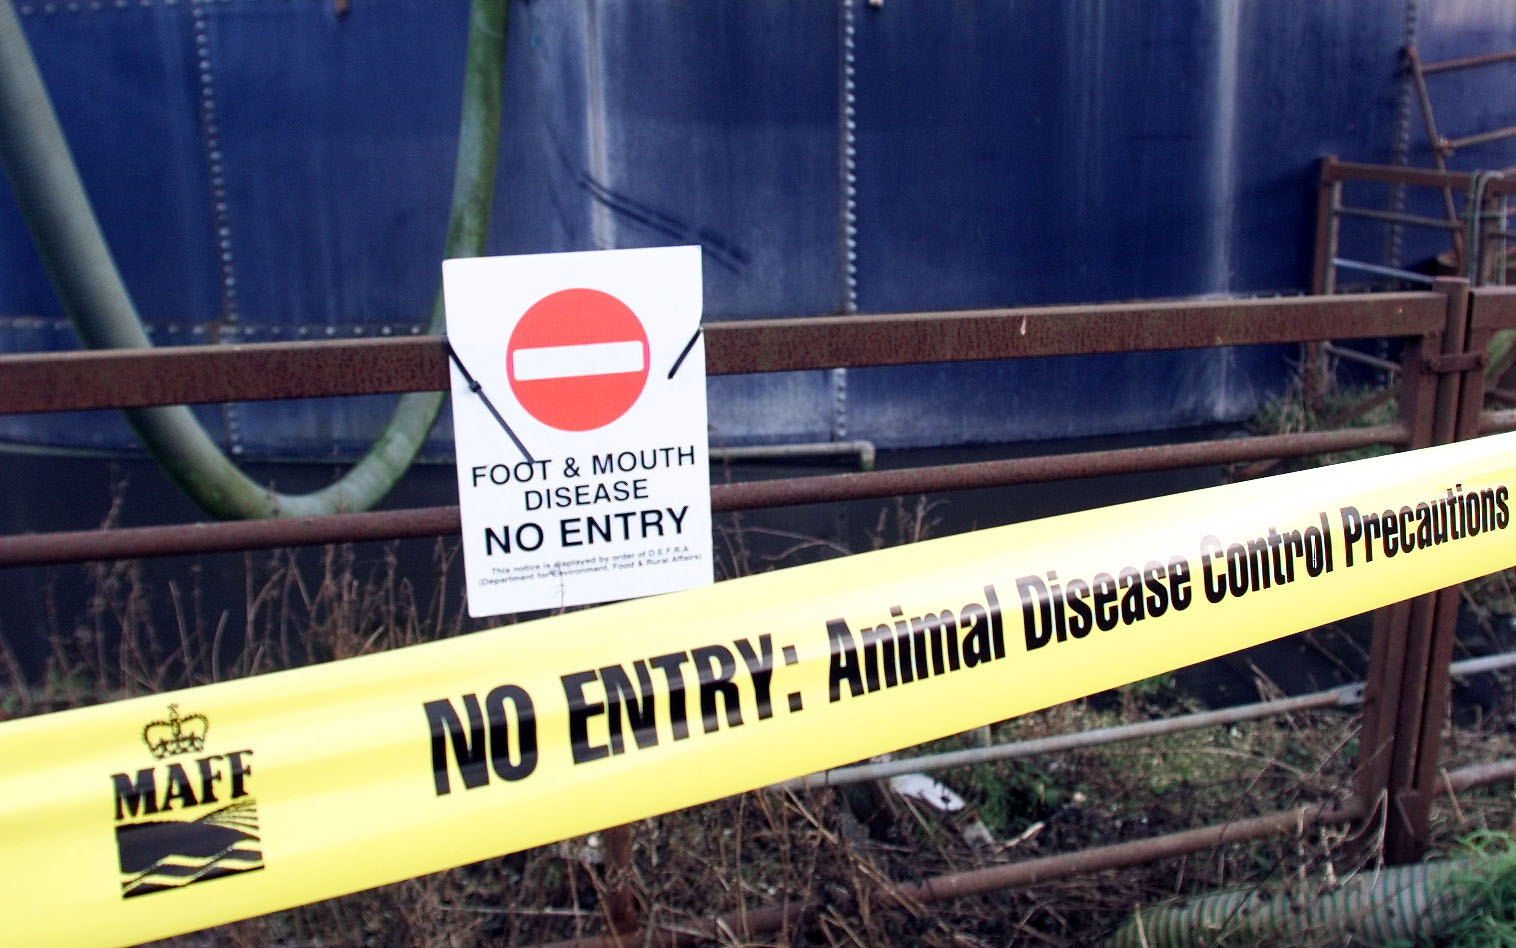 A no entry sign at a farm in Northumberland due to Foot and Mouth Disease